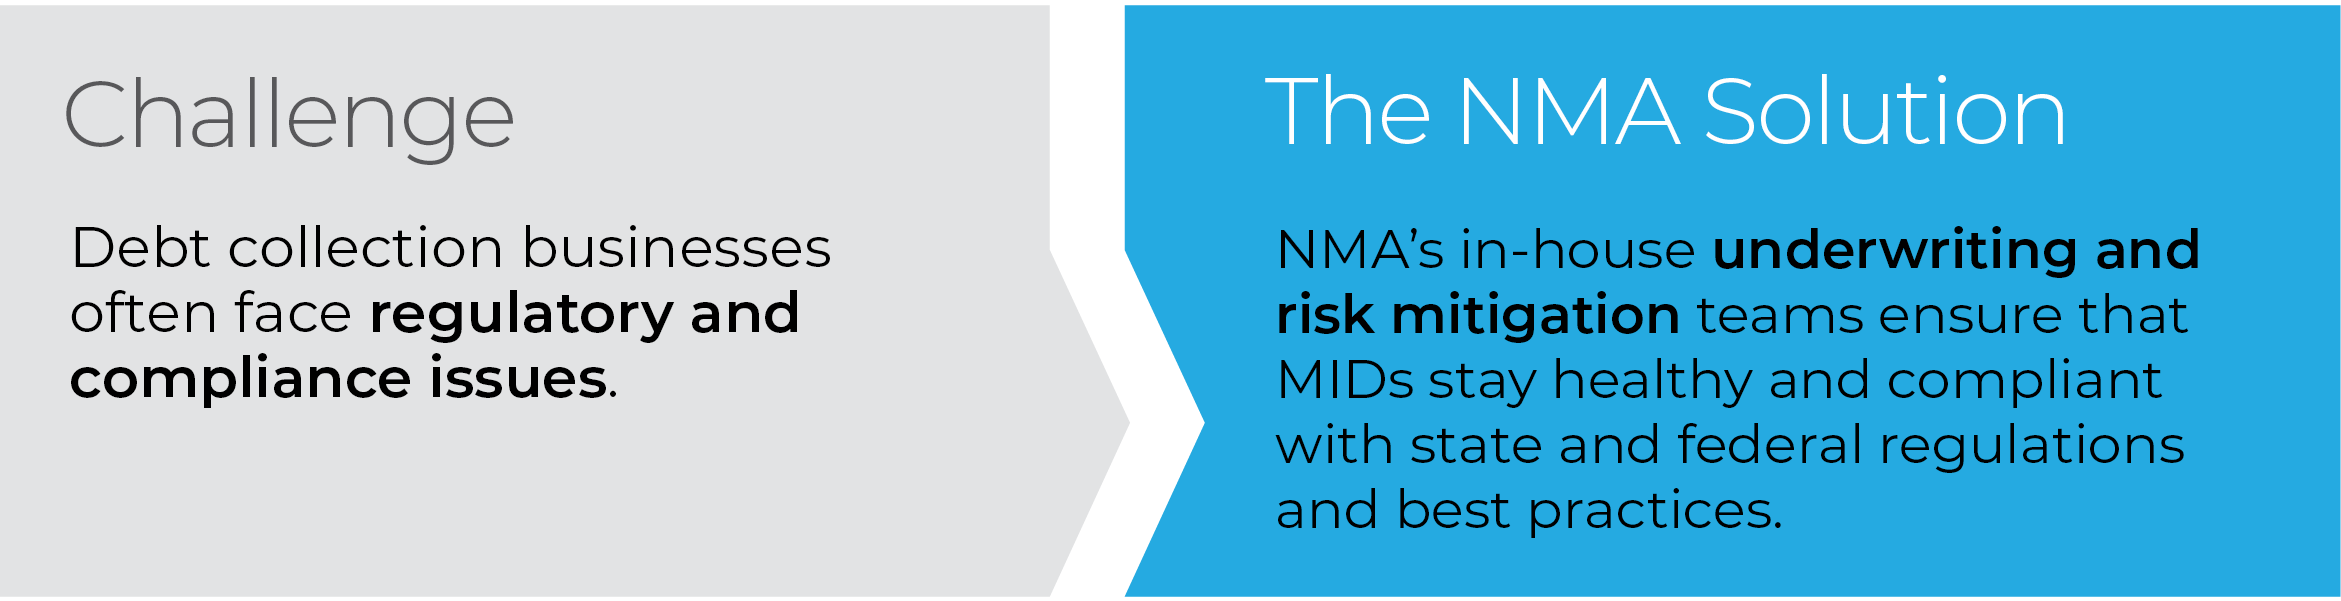 NMA’s in-house underwriting and risk mitigation teams ensure that MIDs stay healthy and compliant with state and federal regulations and best practices.